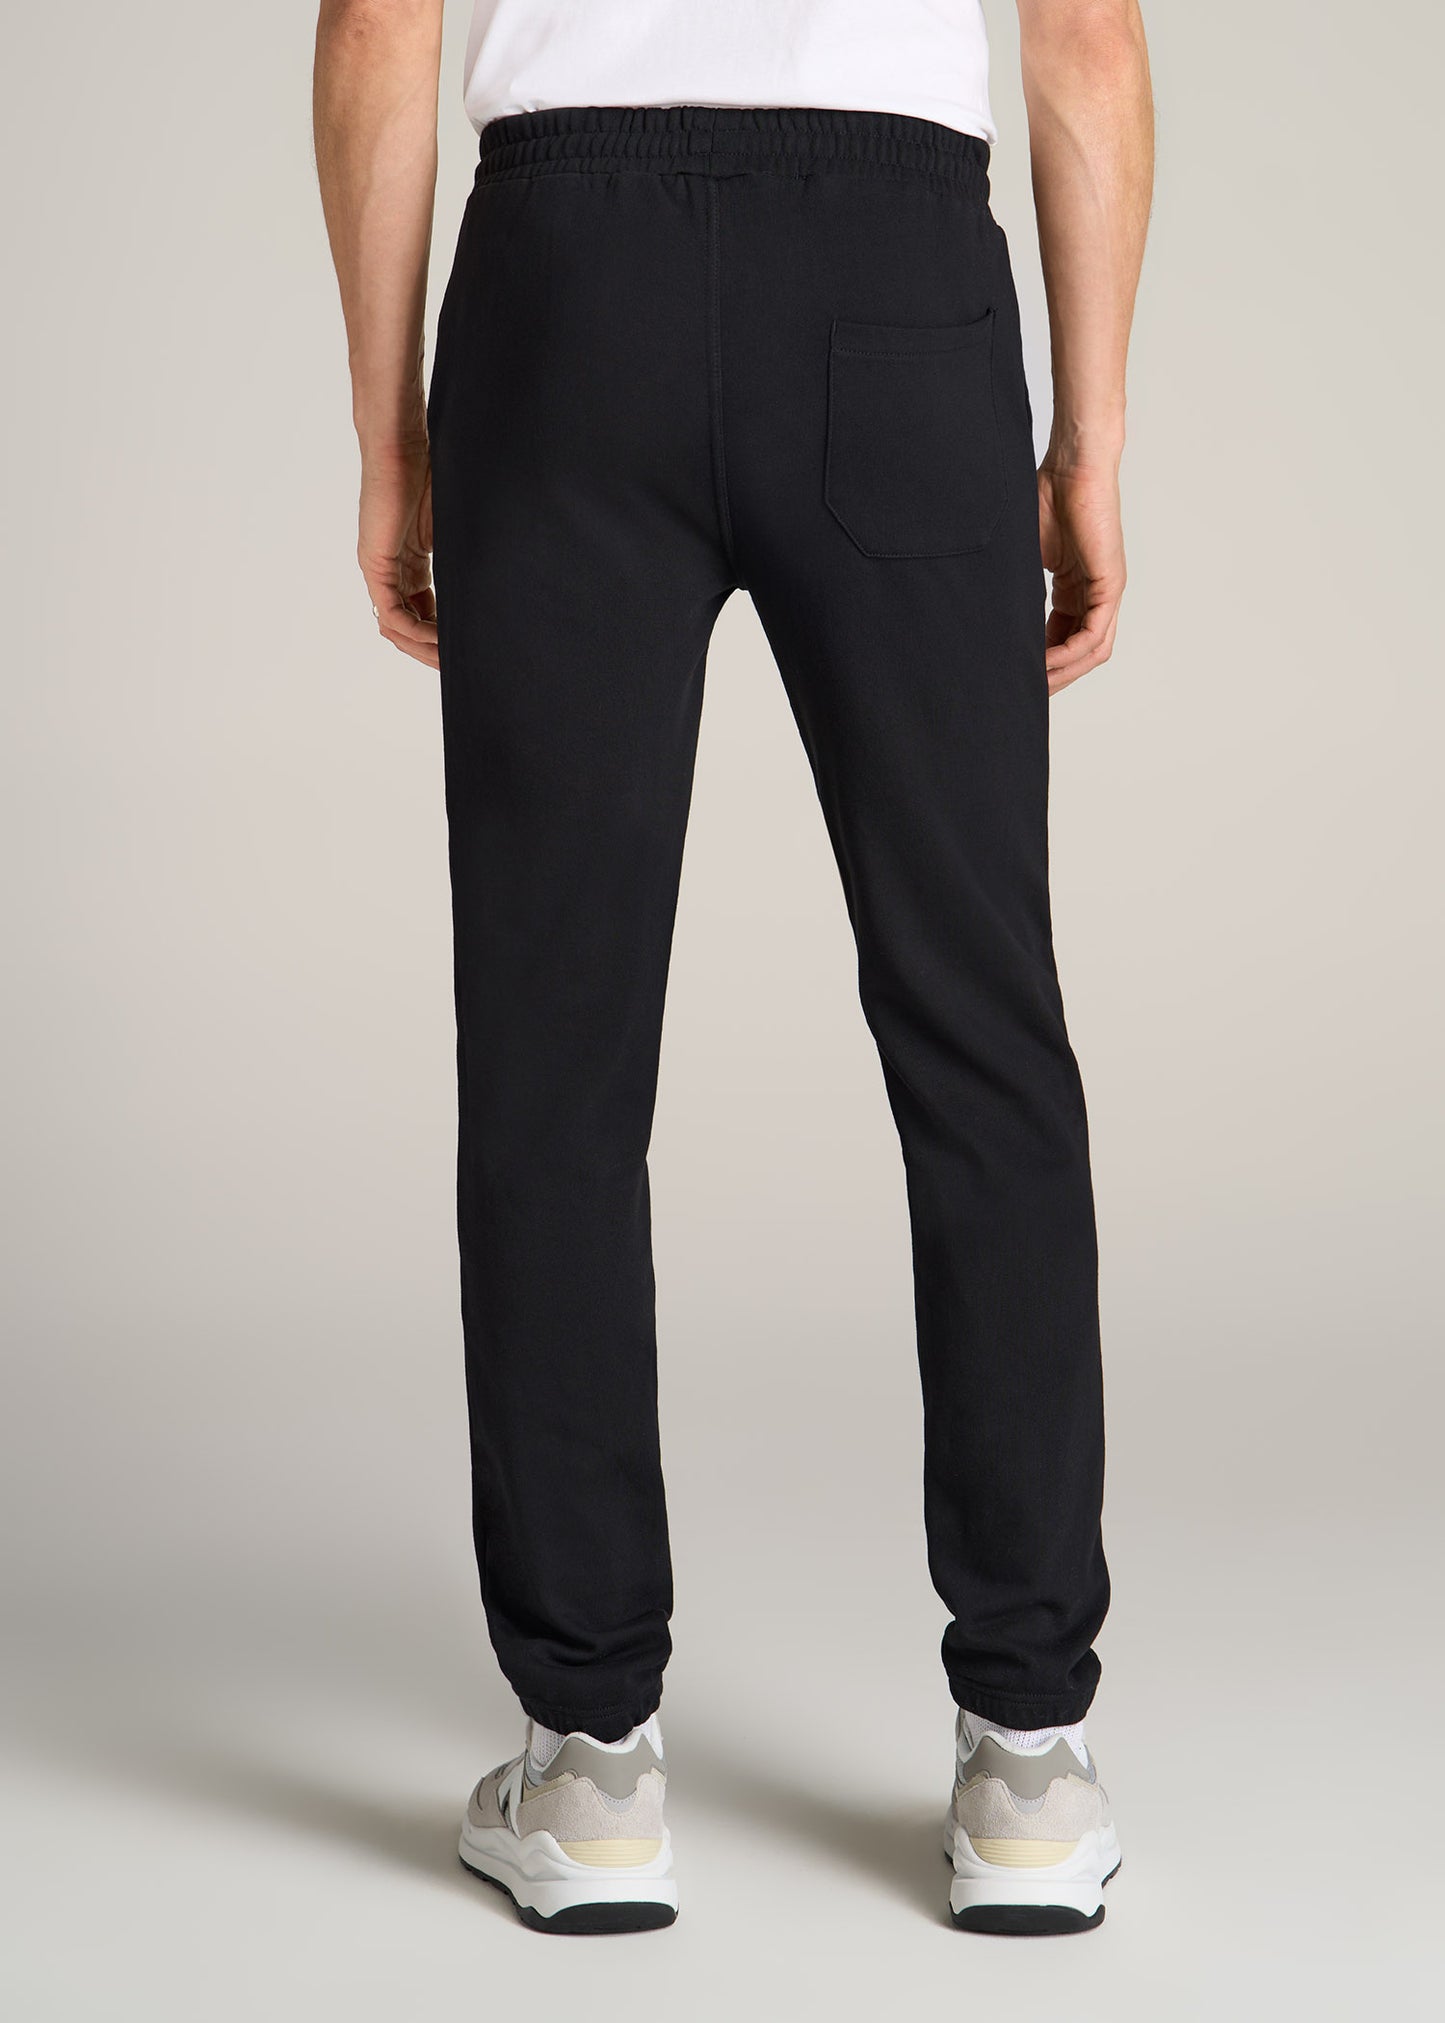 American-Tall-Men-Wearever-French-Terry-Sweatpants-Black-back